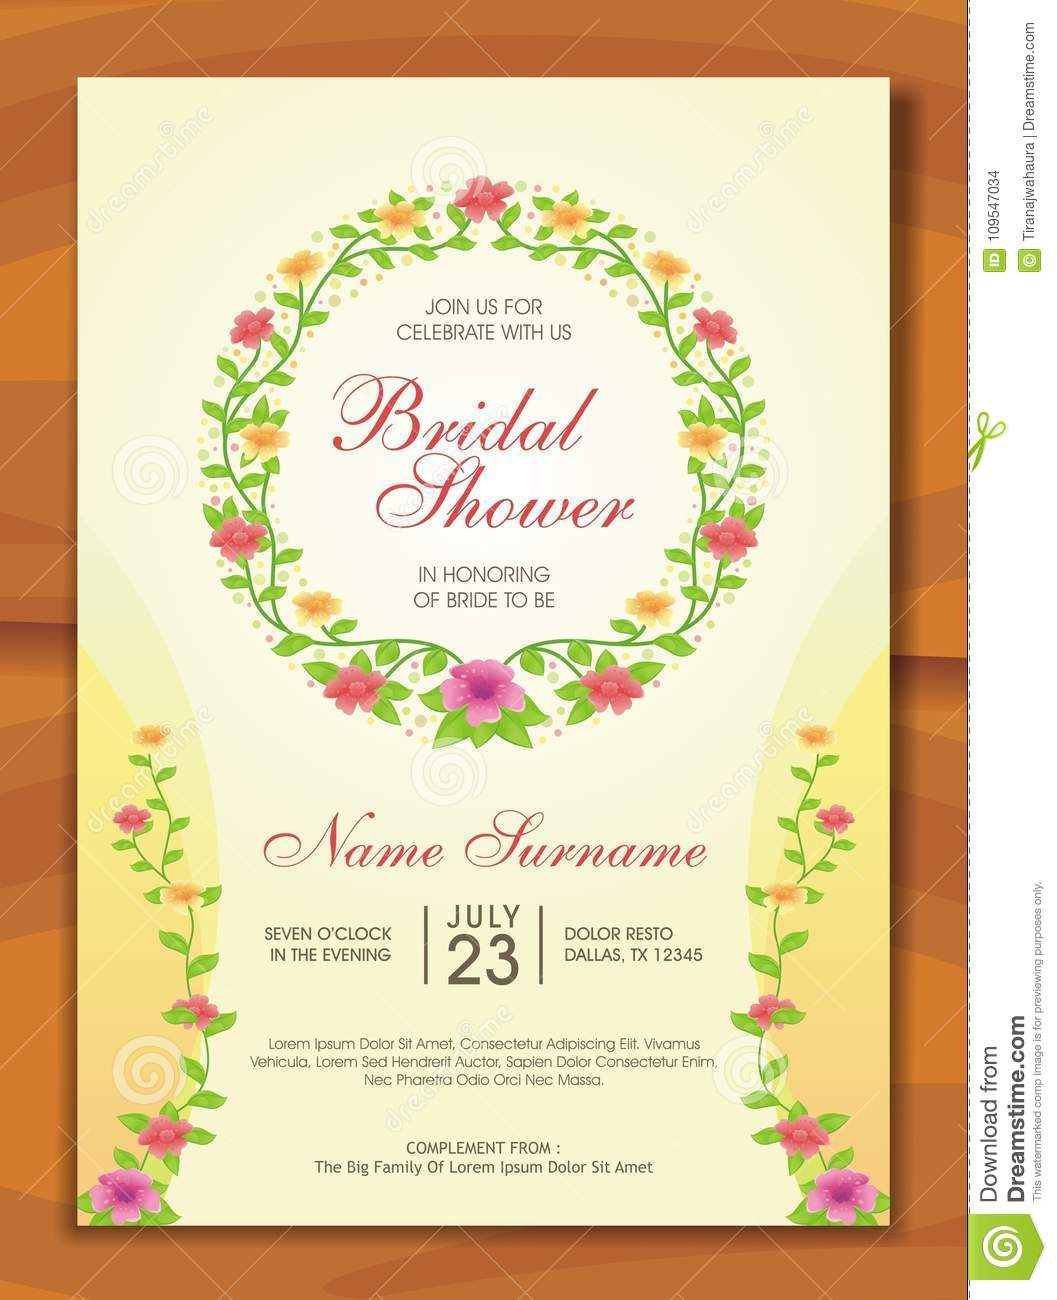 Bridal Shower Invitation With Lovely Design Stock Vector pertaining to sizing 1057 X 1300